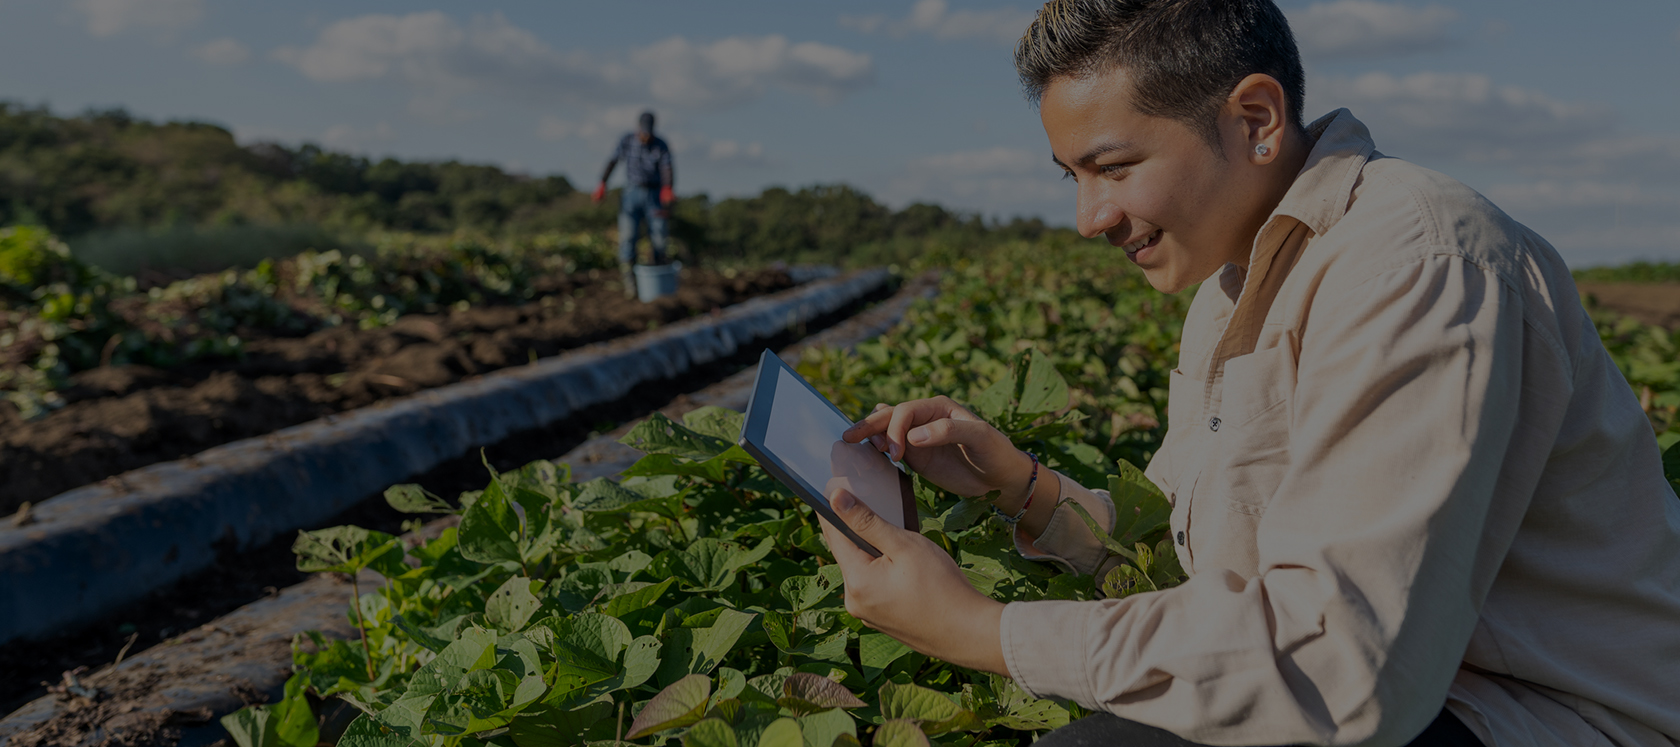 Quectel and farmgo win smart agriculture at iot breakthrough awards